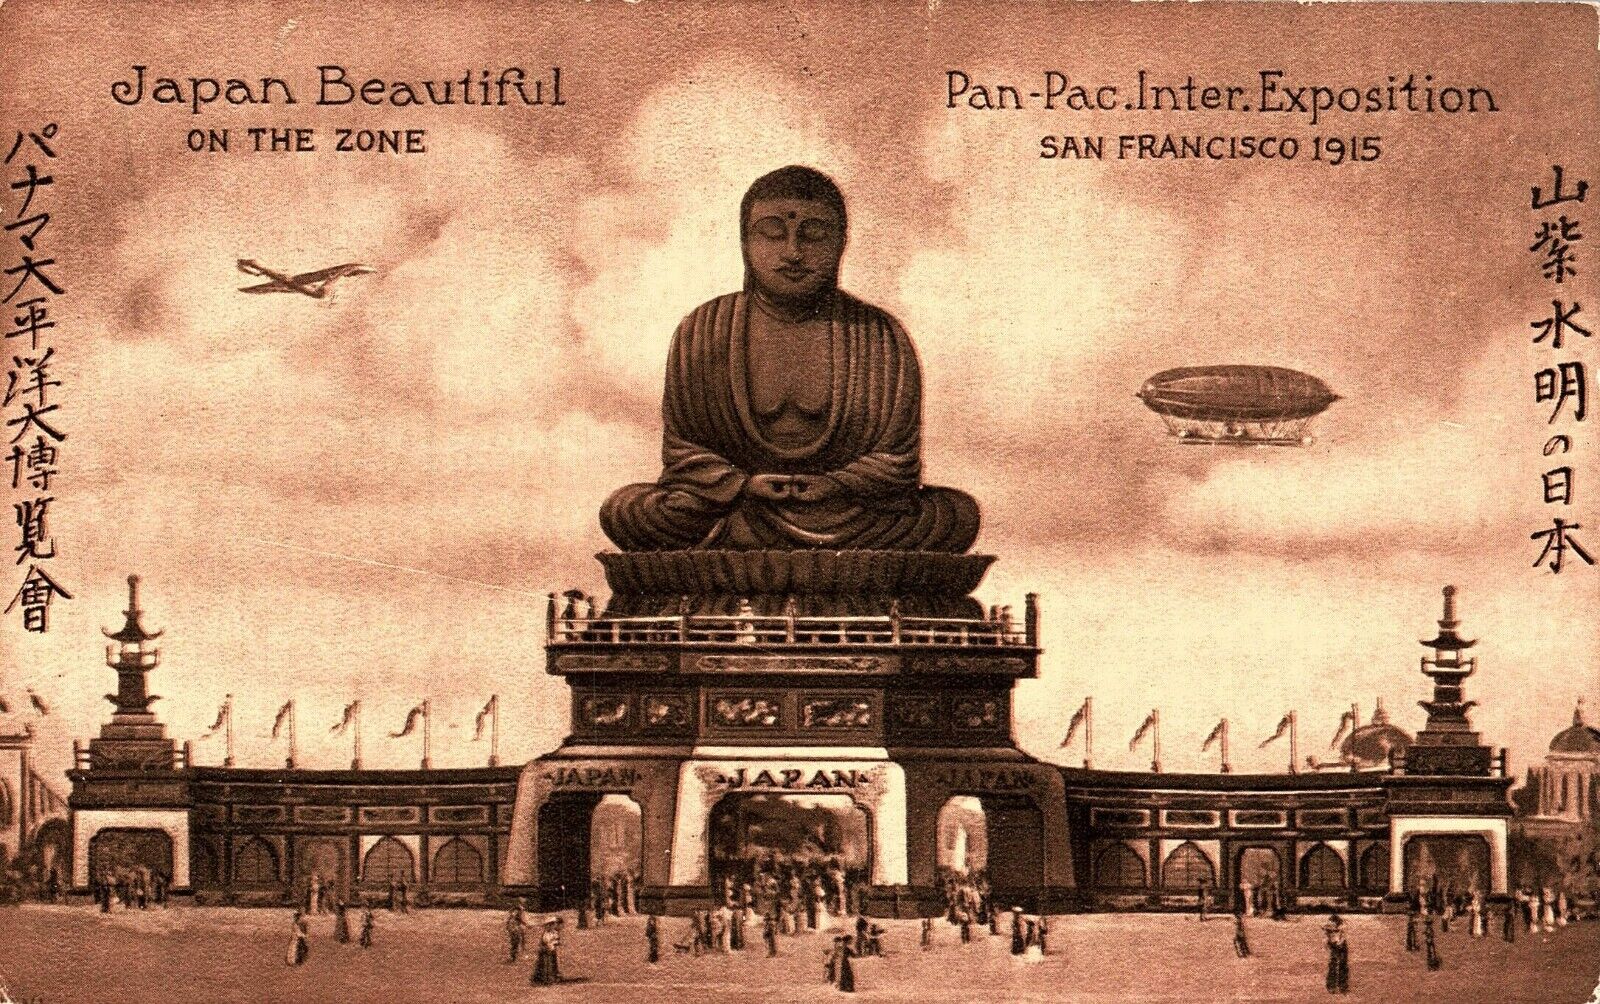 SAN FRANCISCO POSTCARD - JAPAN BEAUTIFUL ON THE ZONE - PPIE 1915 - DIRIGIBLE